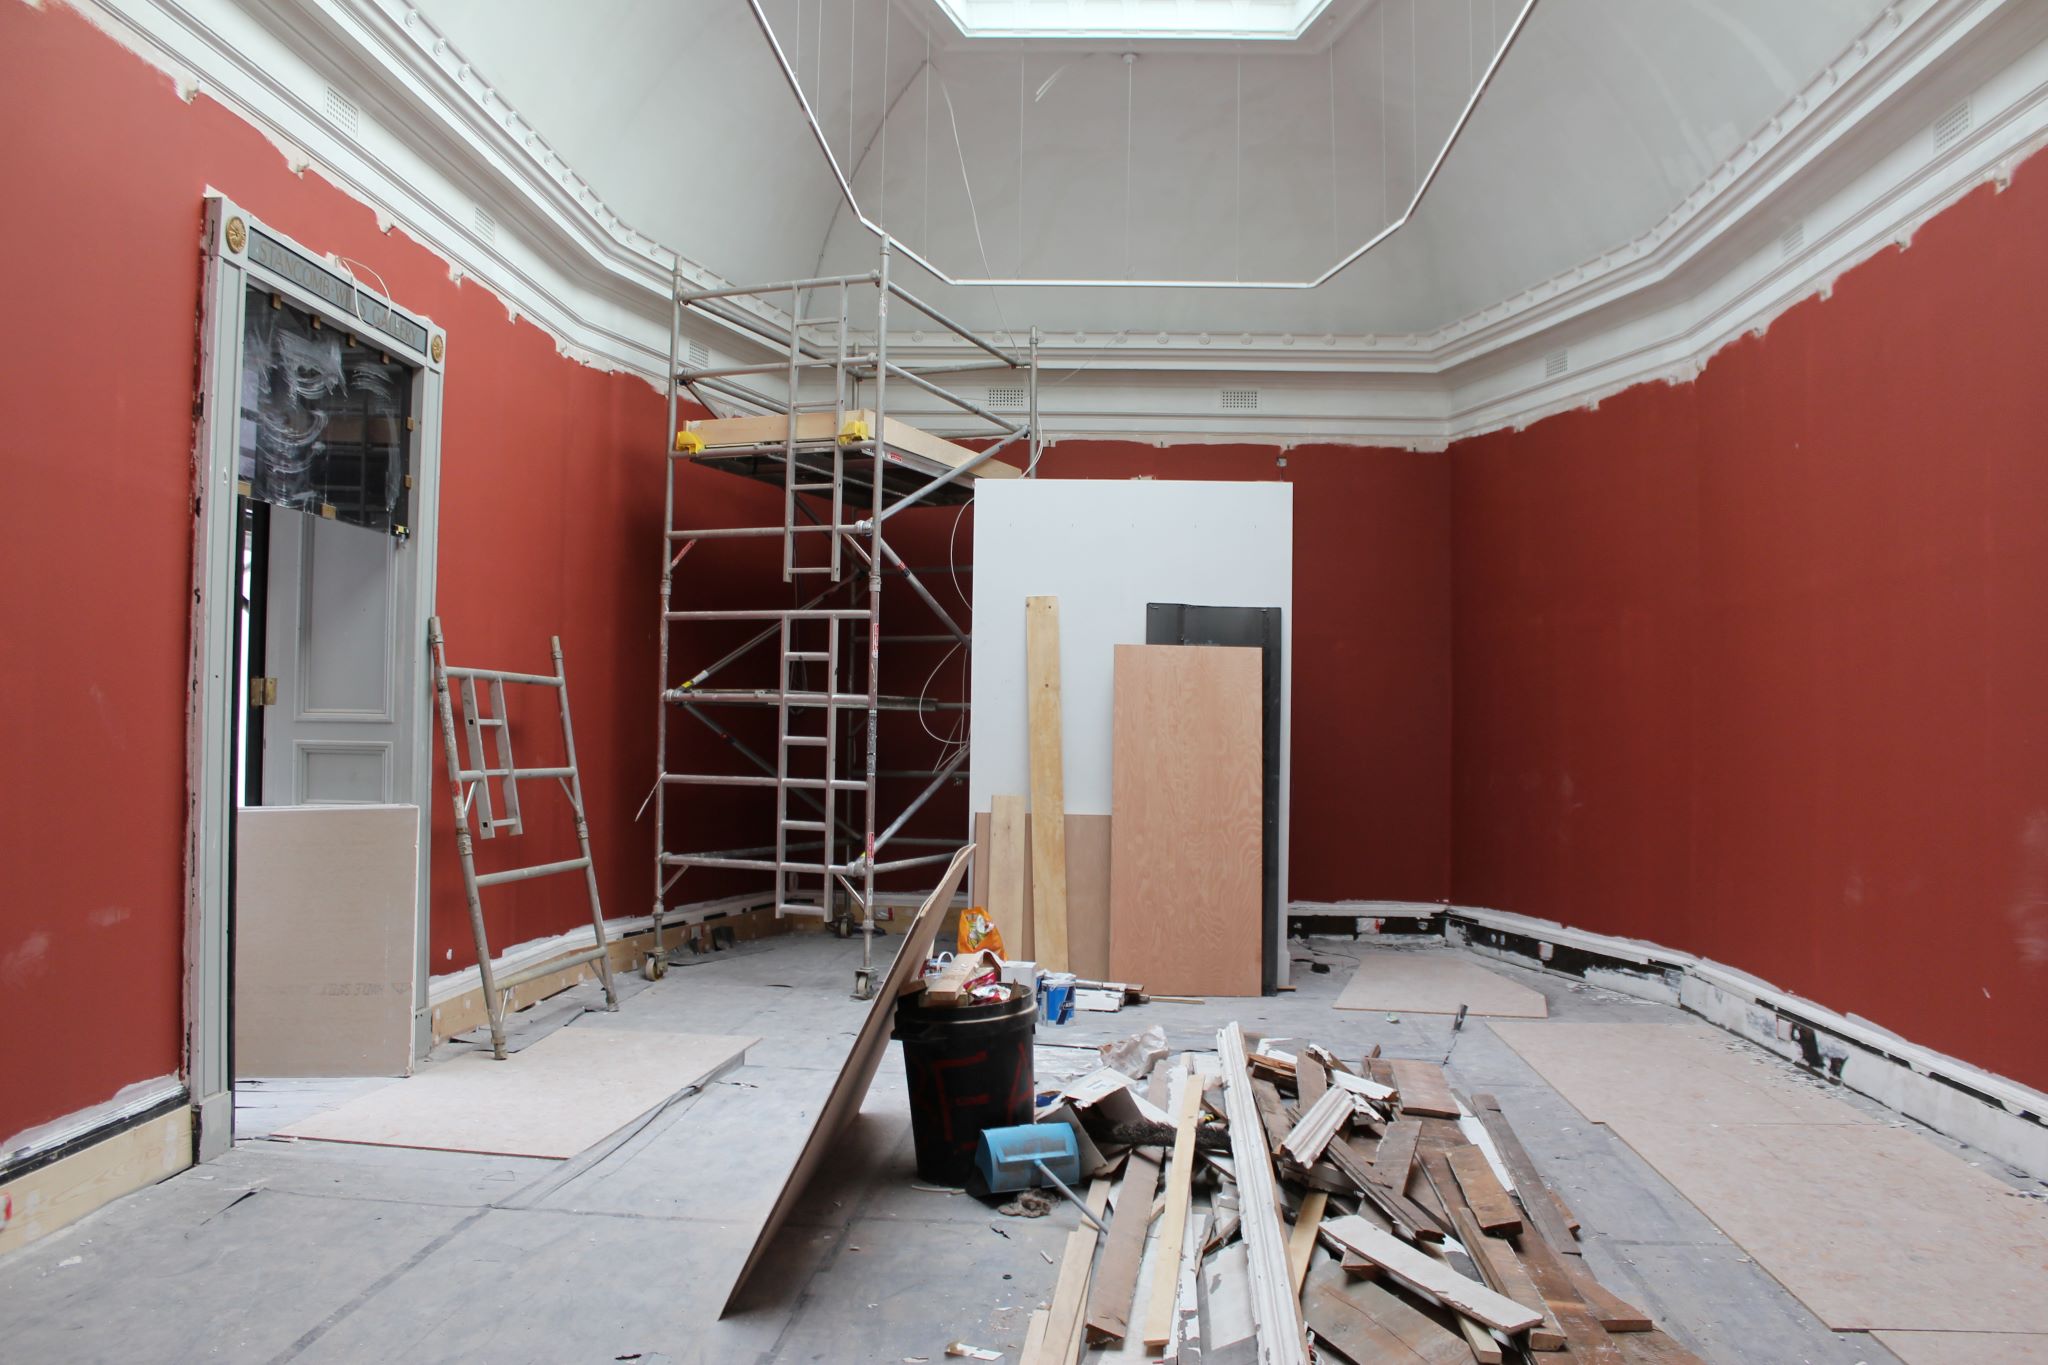 A gallery space with building materials in the centre and red painted walls 